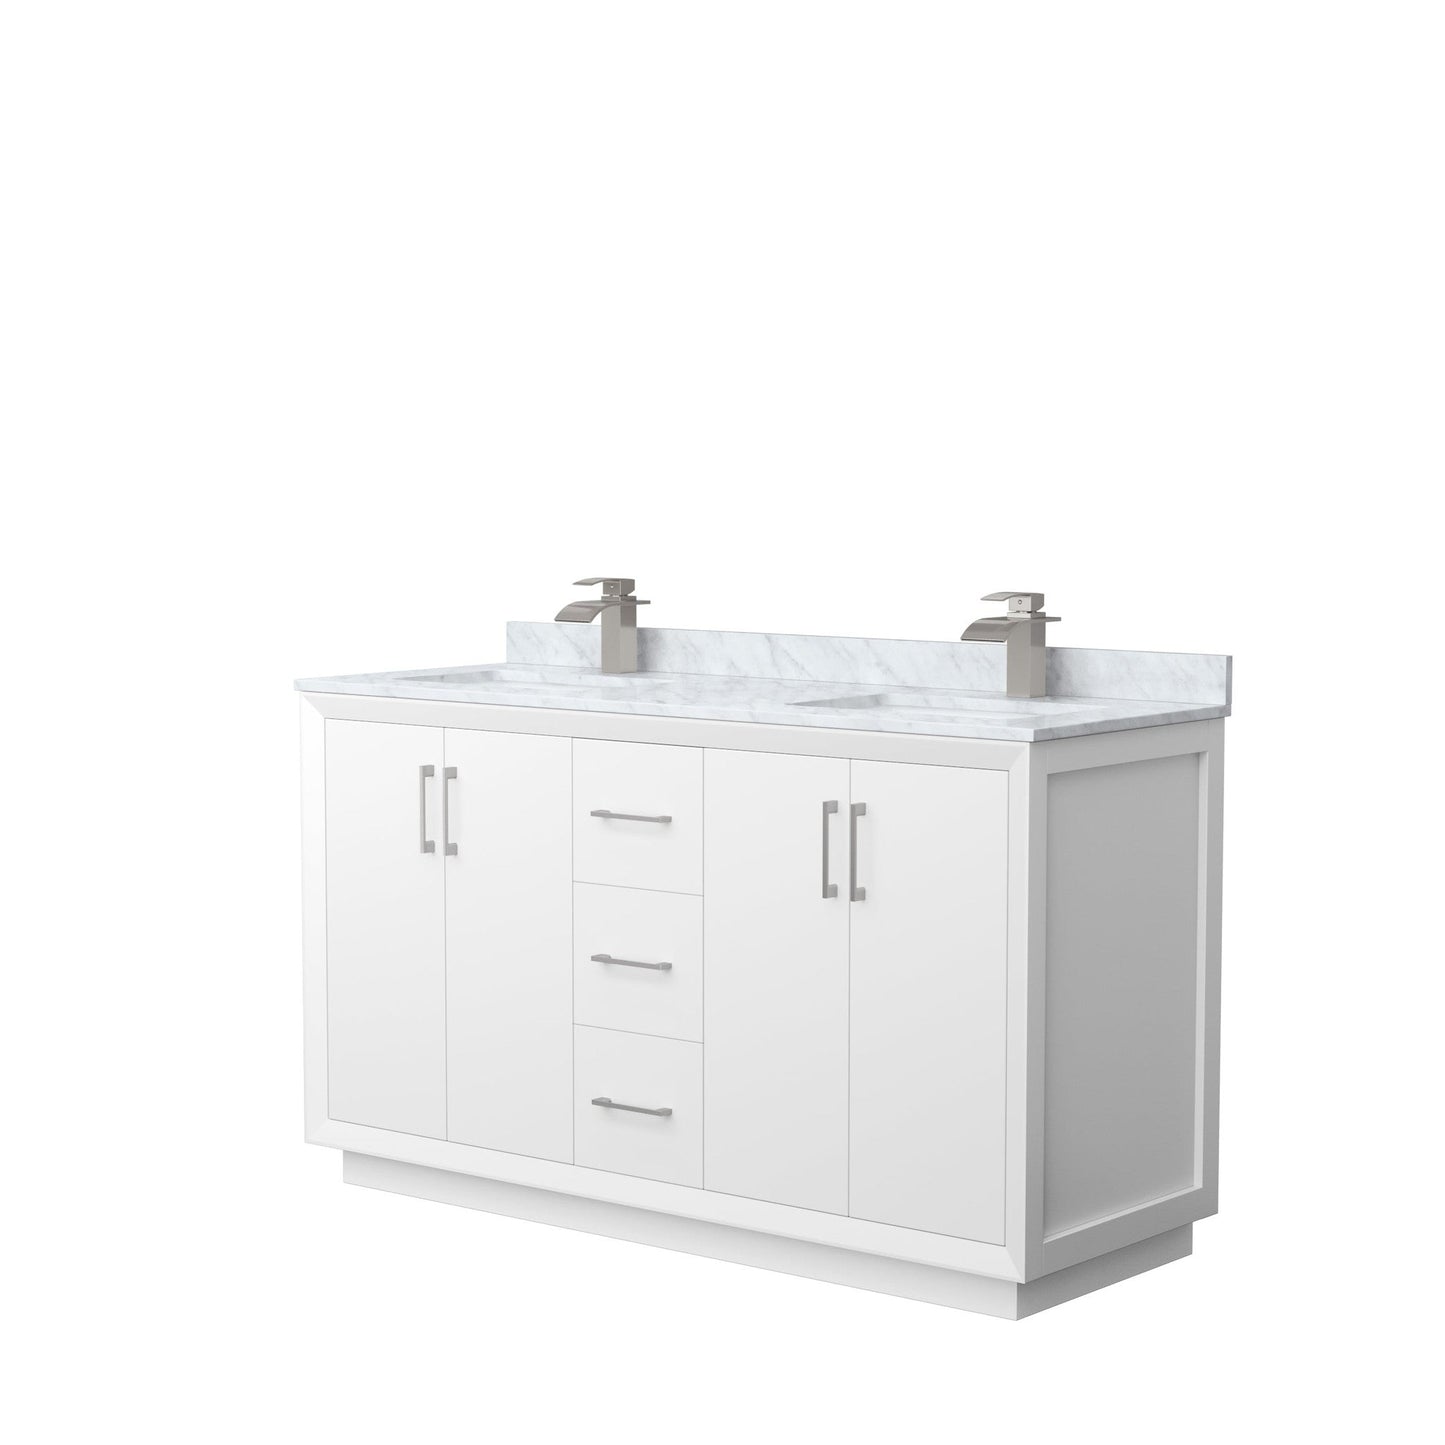 Wyndham Collection Strada 60" Double Bathroom Vanity in White, White Carrara Marble Countertop, Undermount Square Sink, Brushed Nickel Trim